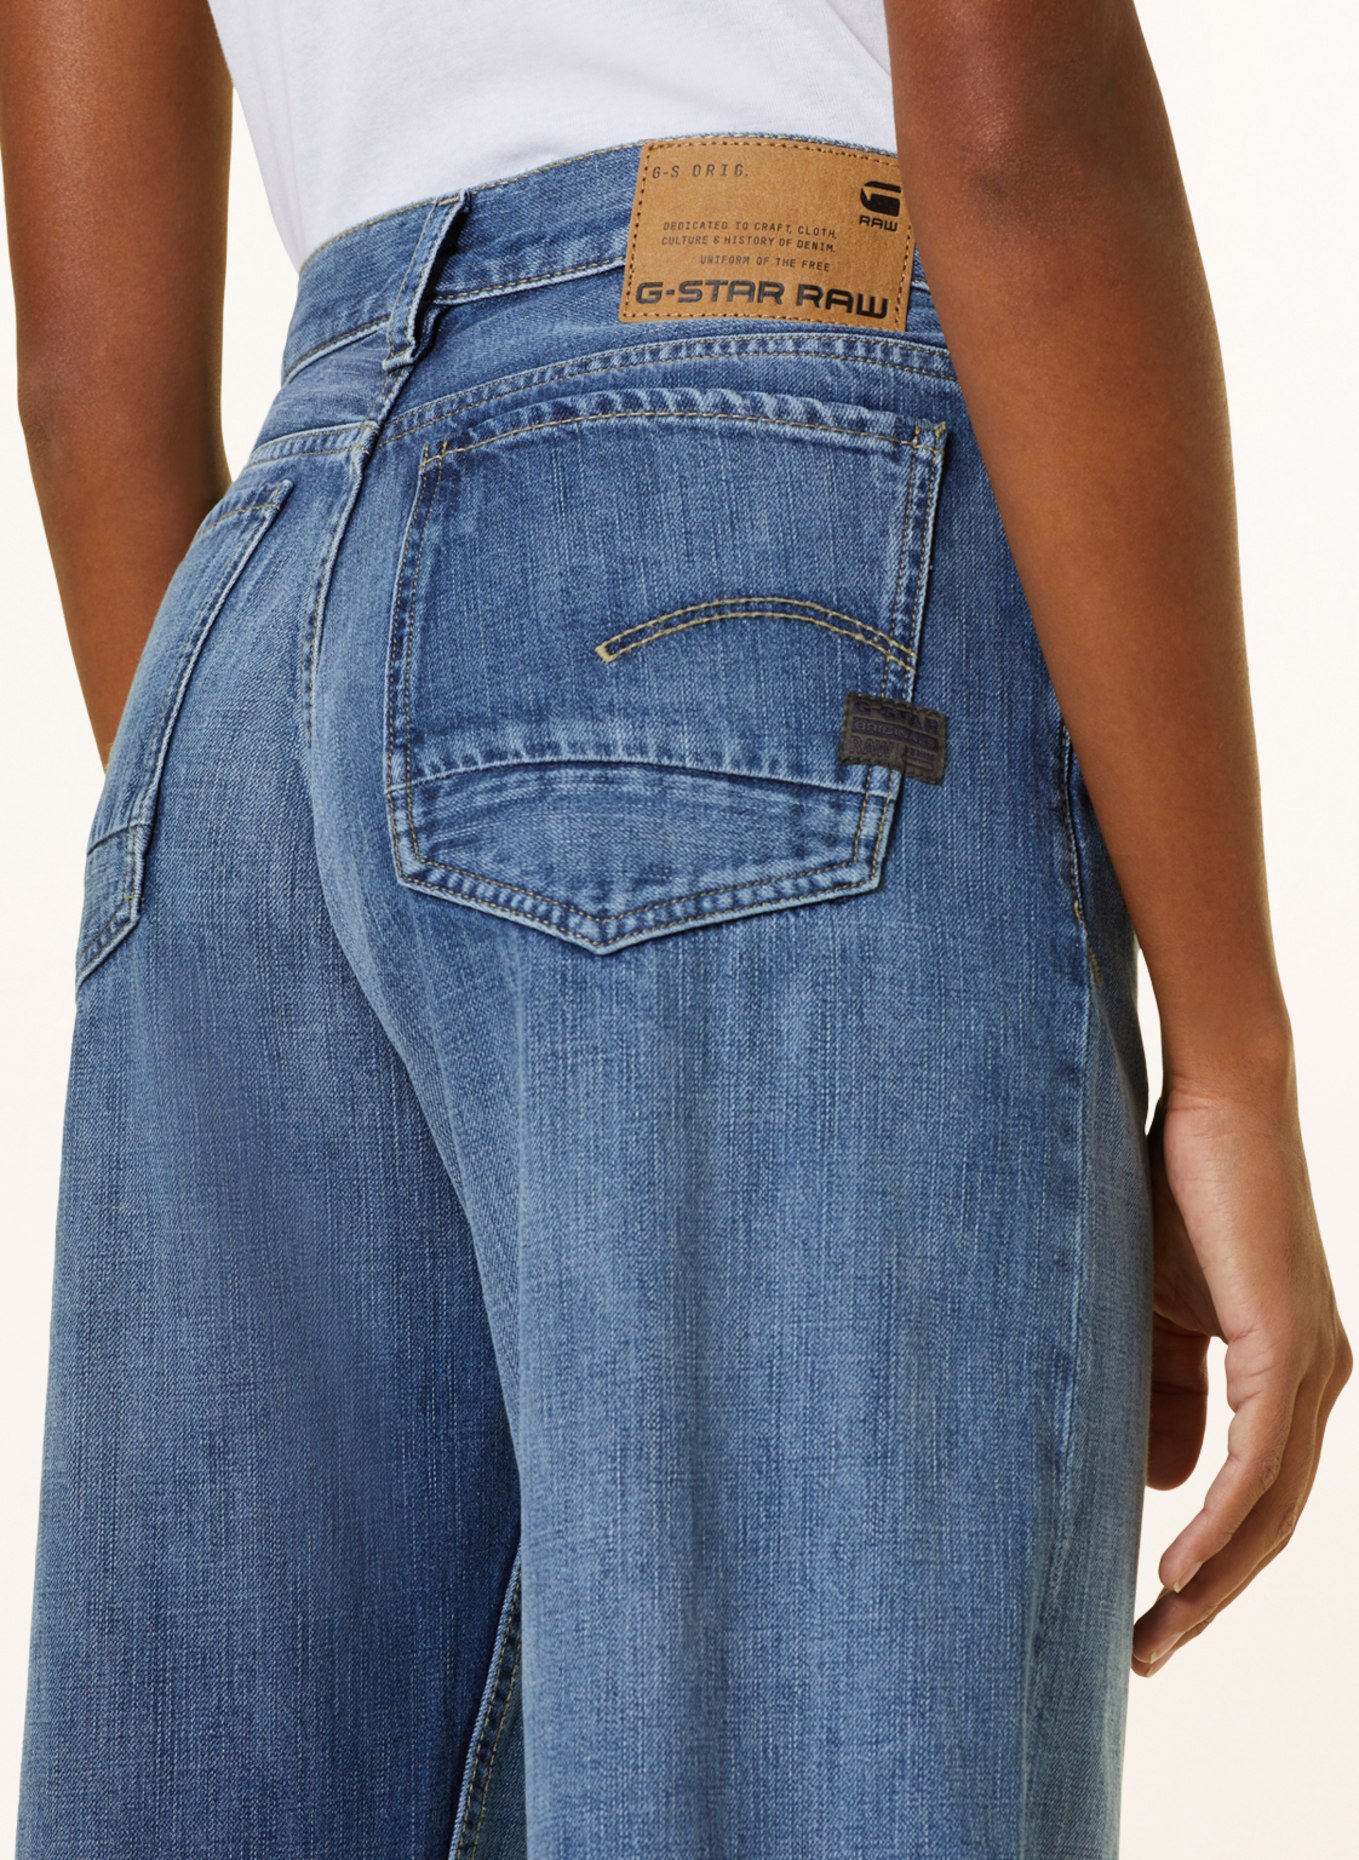 G-Star RAW Straight jeans JUDEE, Color: D895 faded waterfront (Image 5)